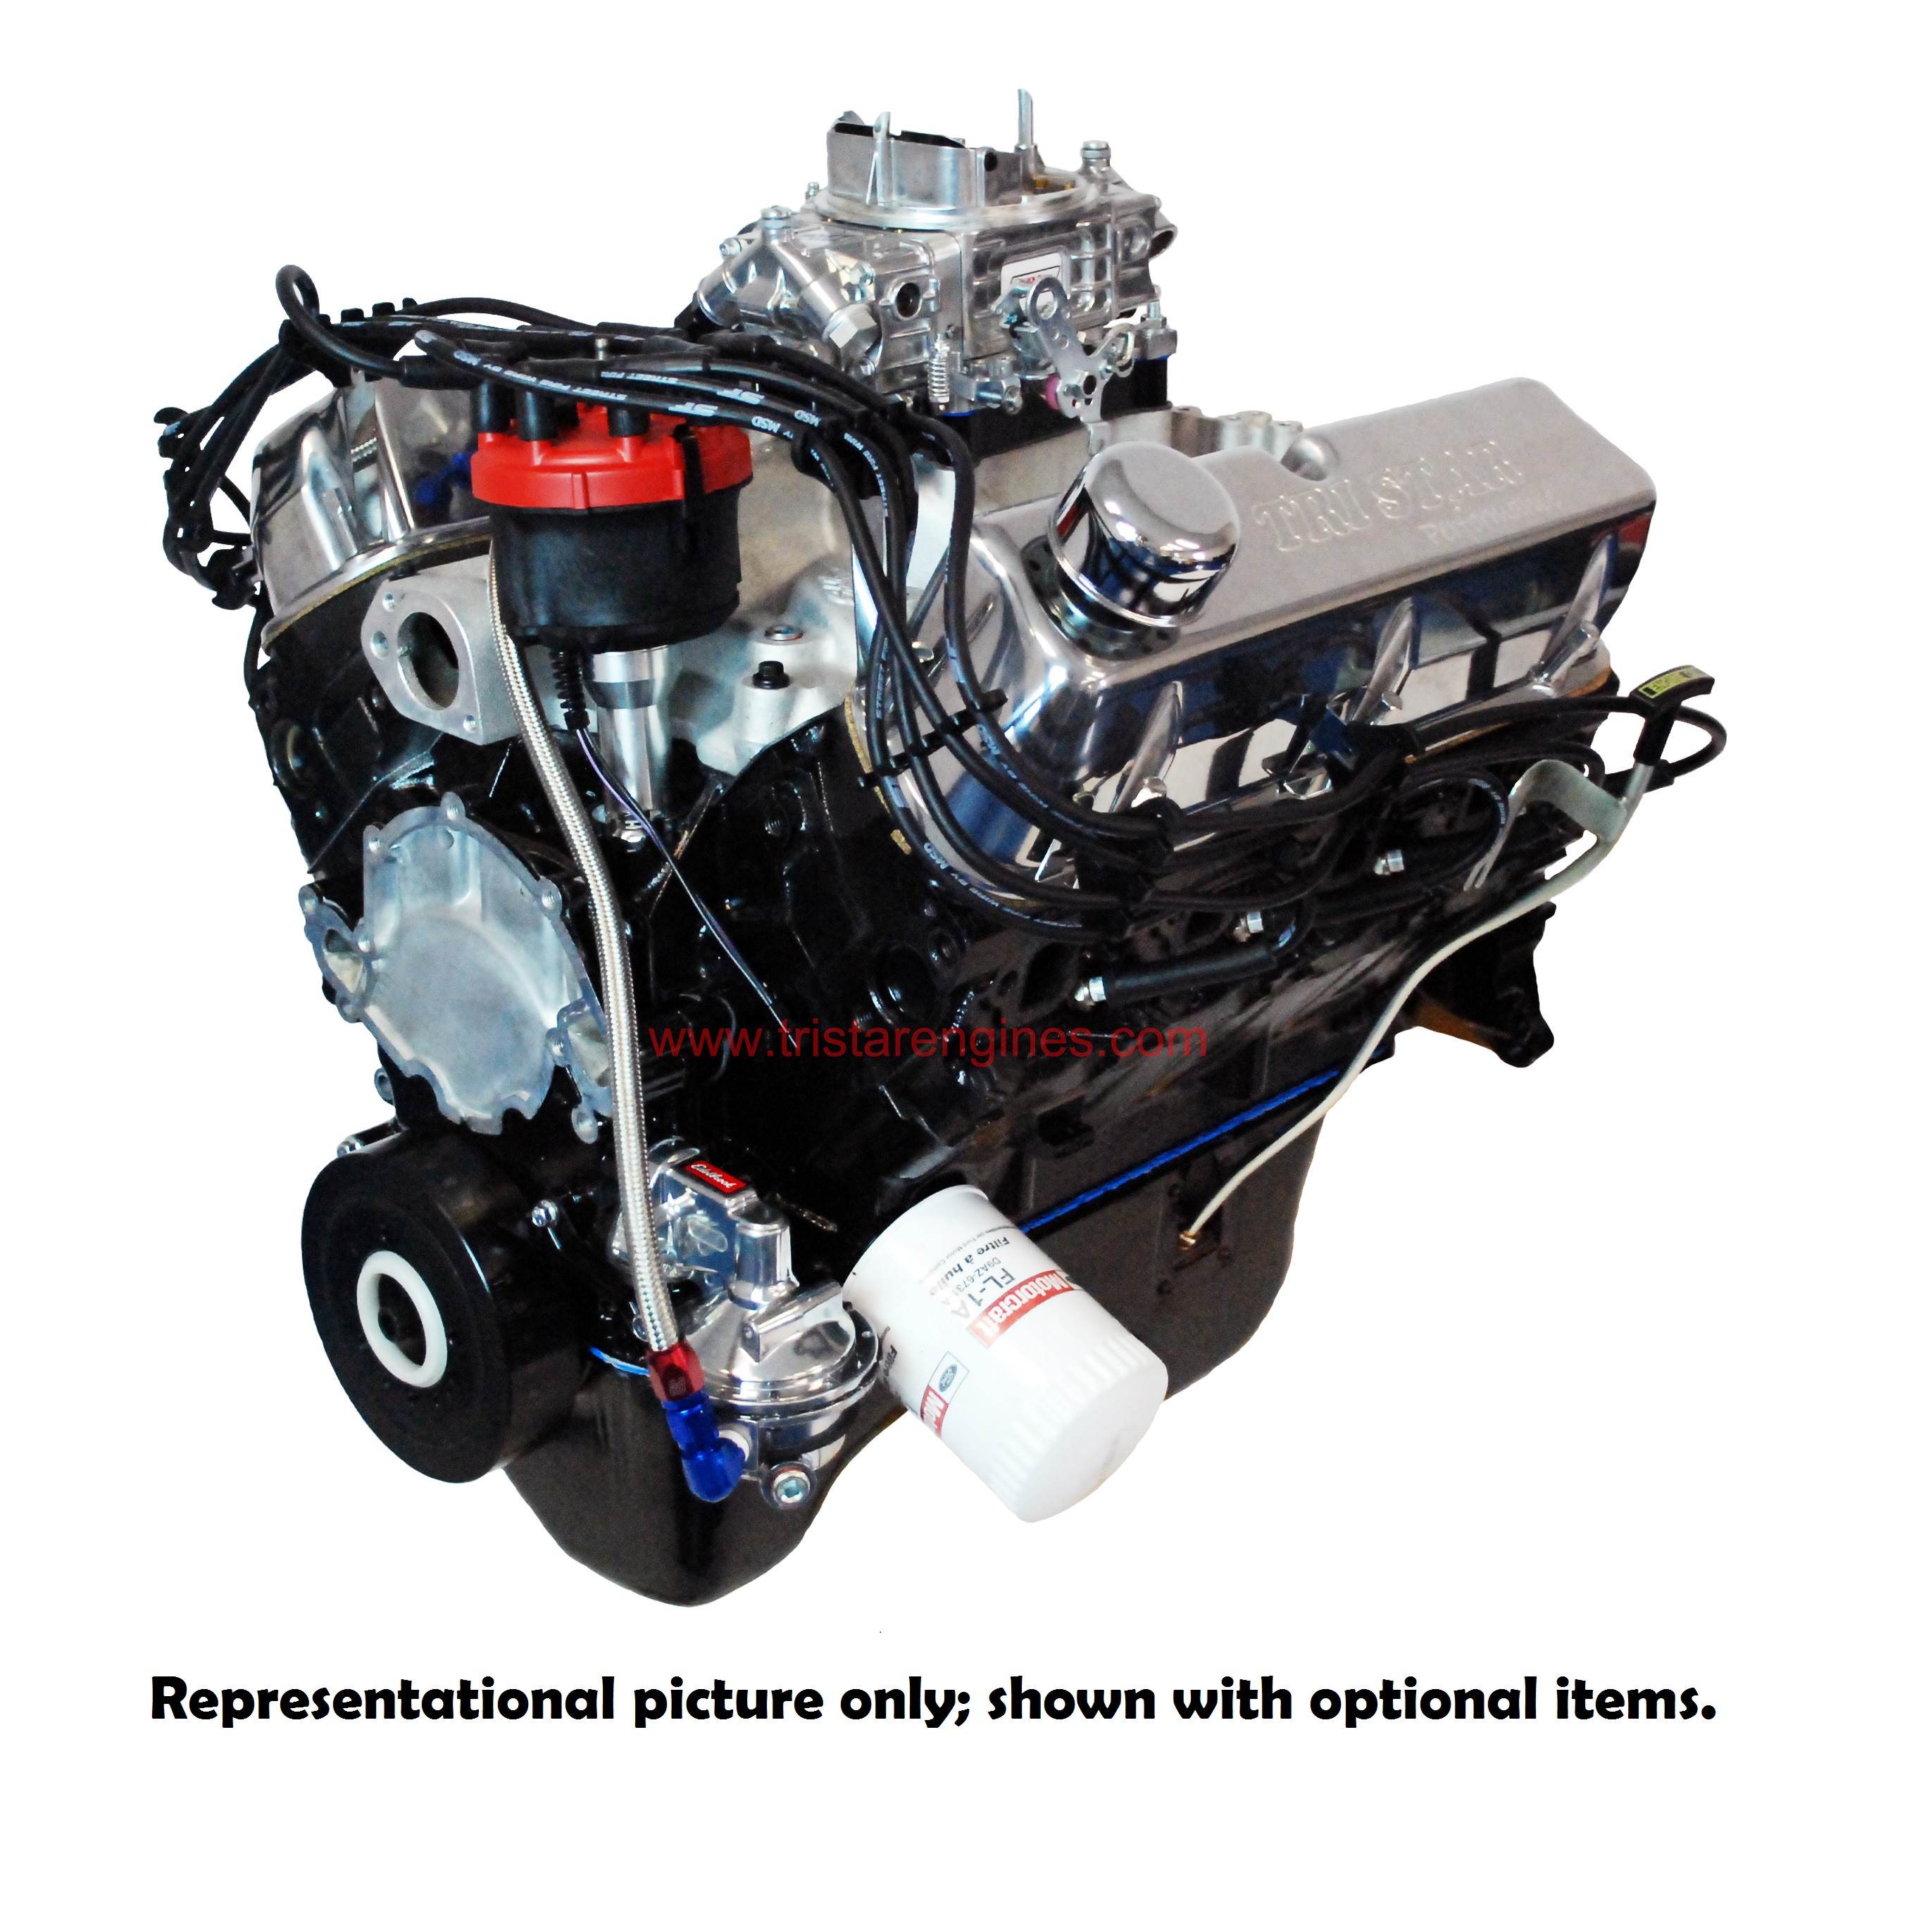 Ford Performance Crate Engine